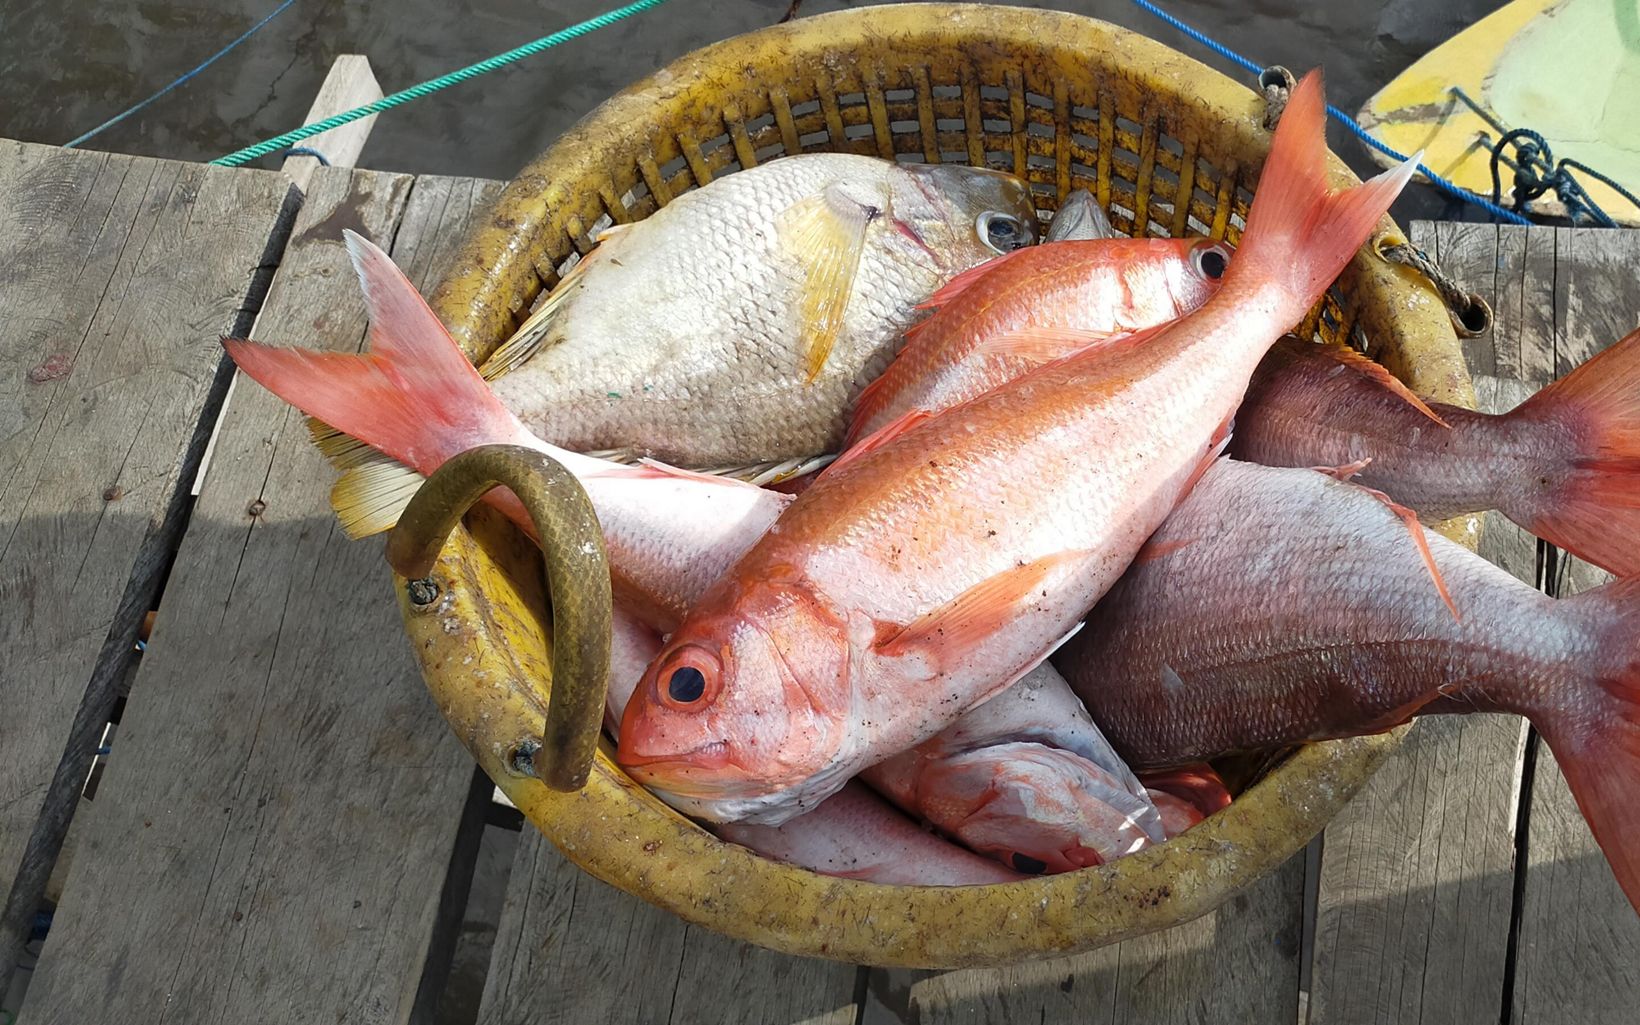 
                
                  Snappers In the Basket Red snappers caught by fishermen.
                  © YKAN
                
              